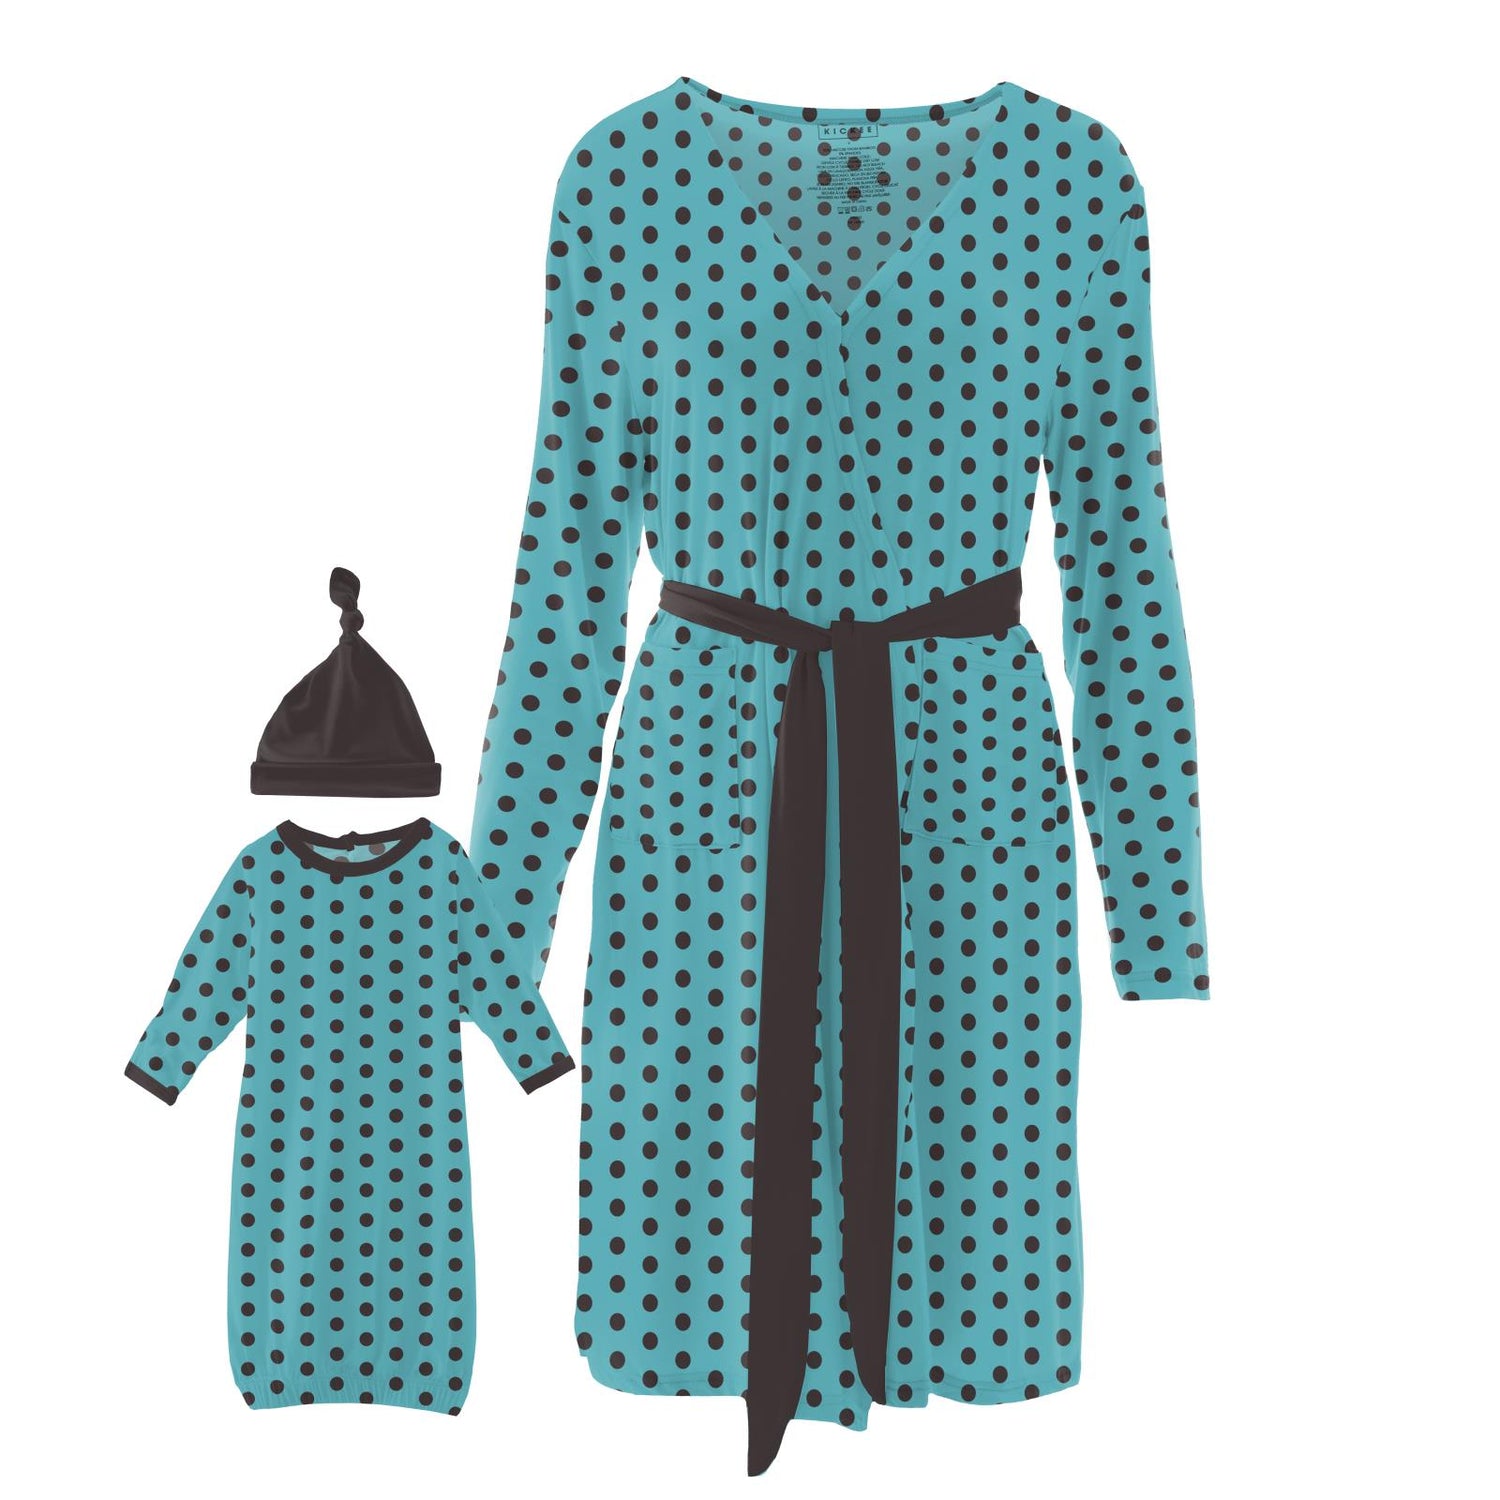 Women's Print Mid Length Lounge Robe & Layette Gown Set in Glacier Polka Dots